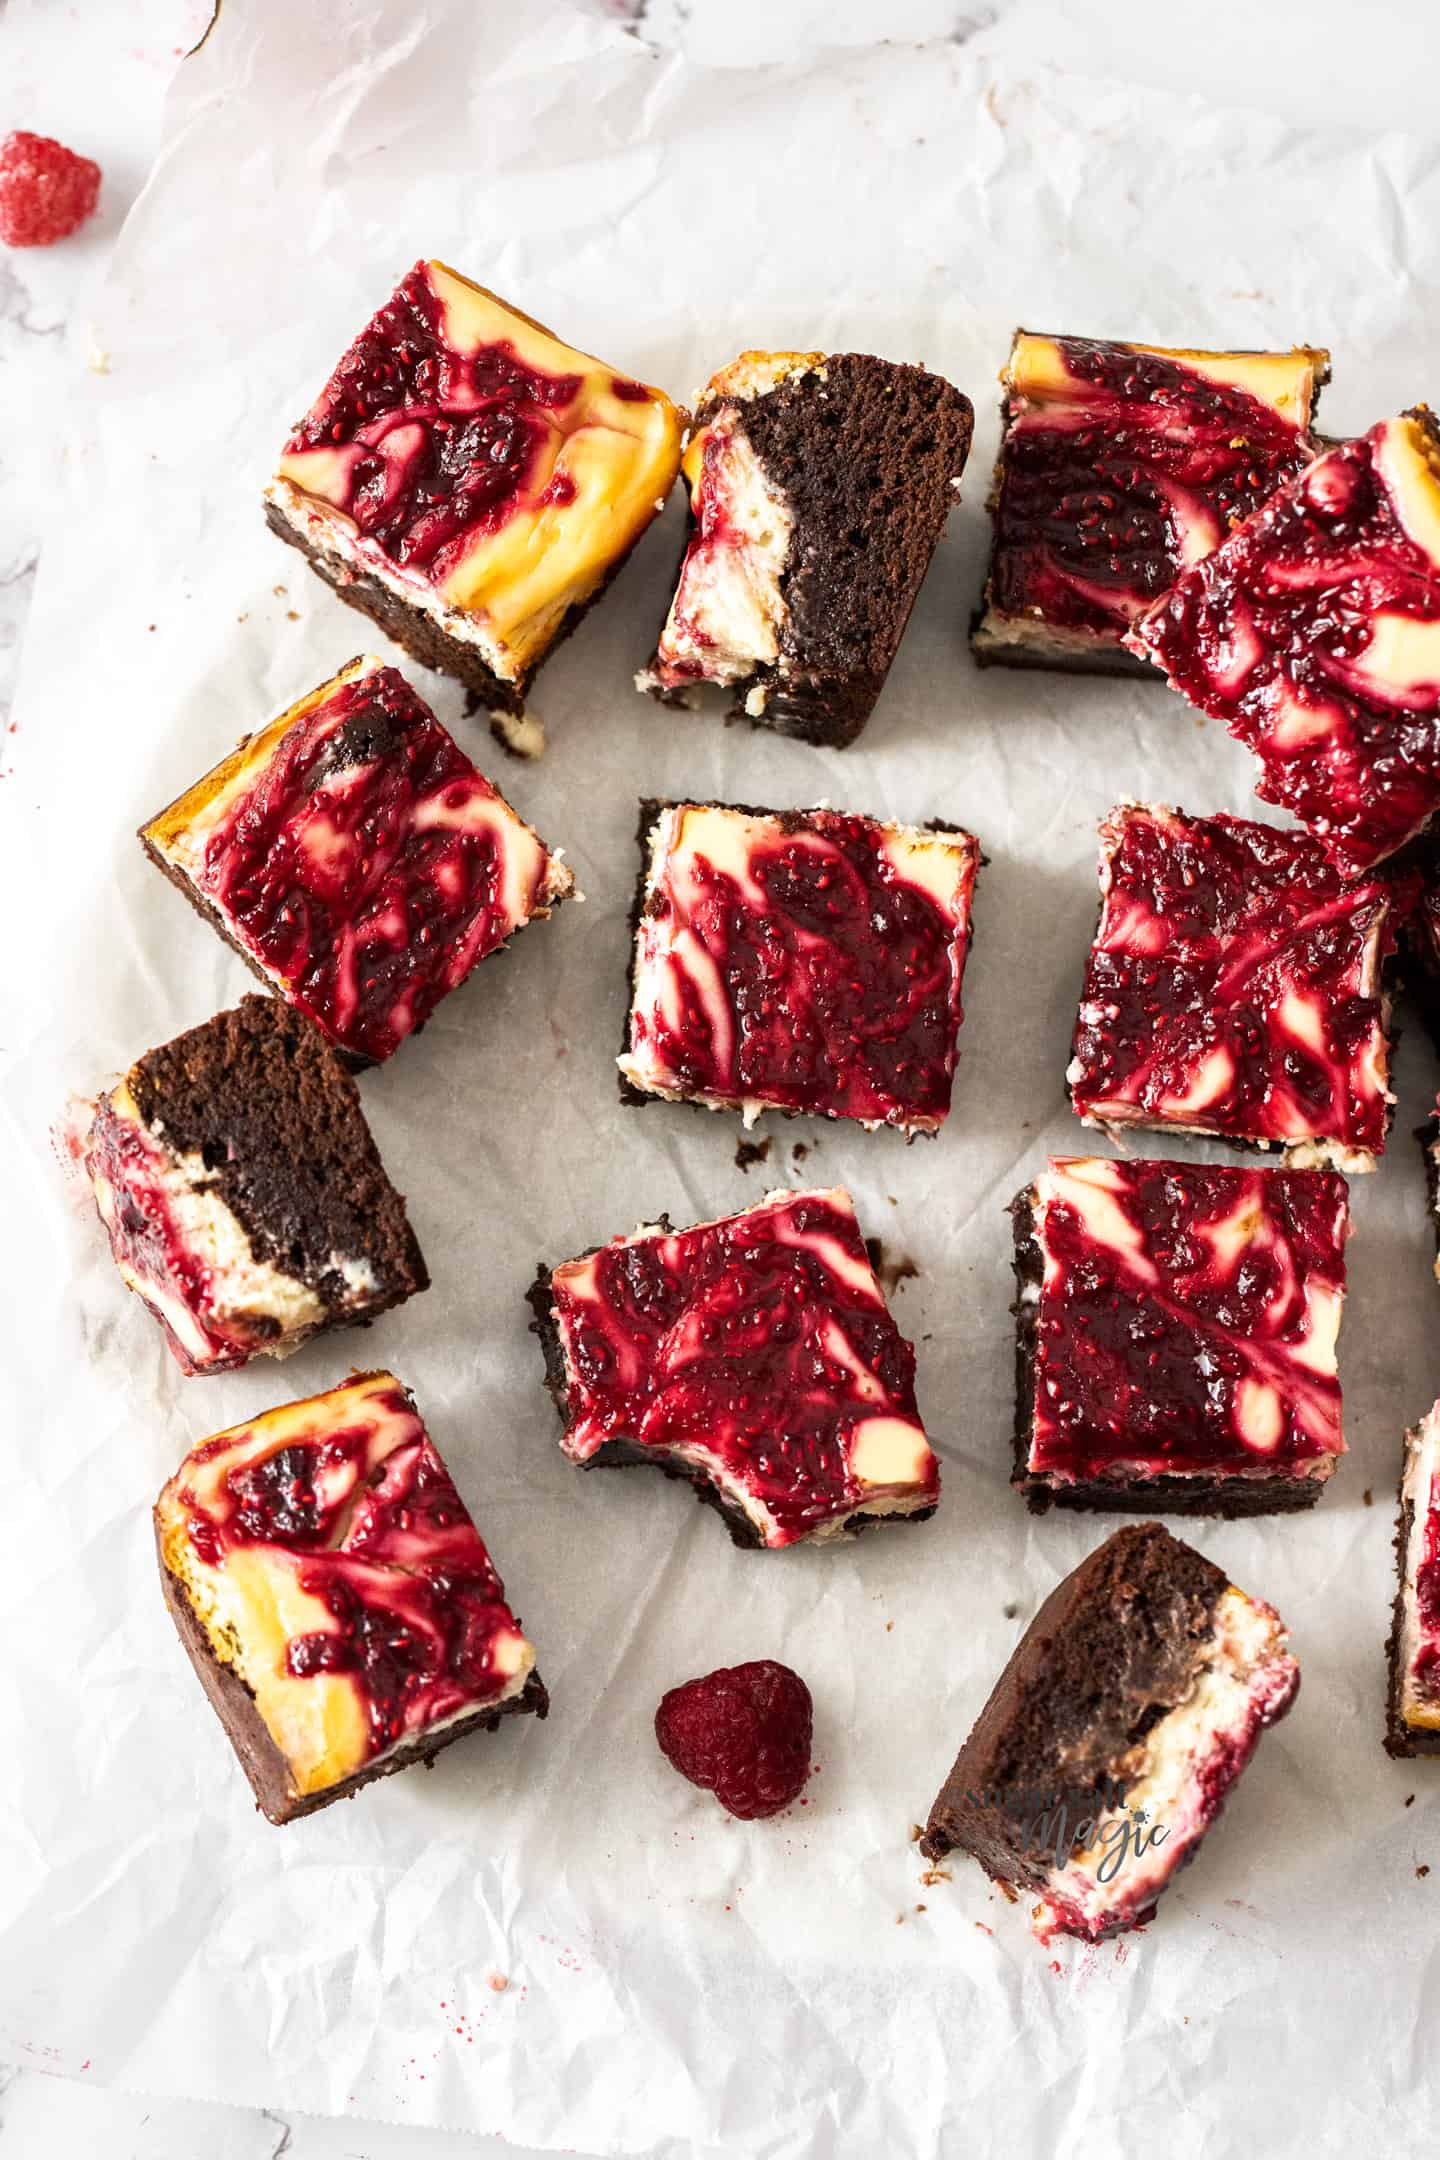 A batch of raspberry cheesecake brownies on a sheet of baking paper.